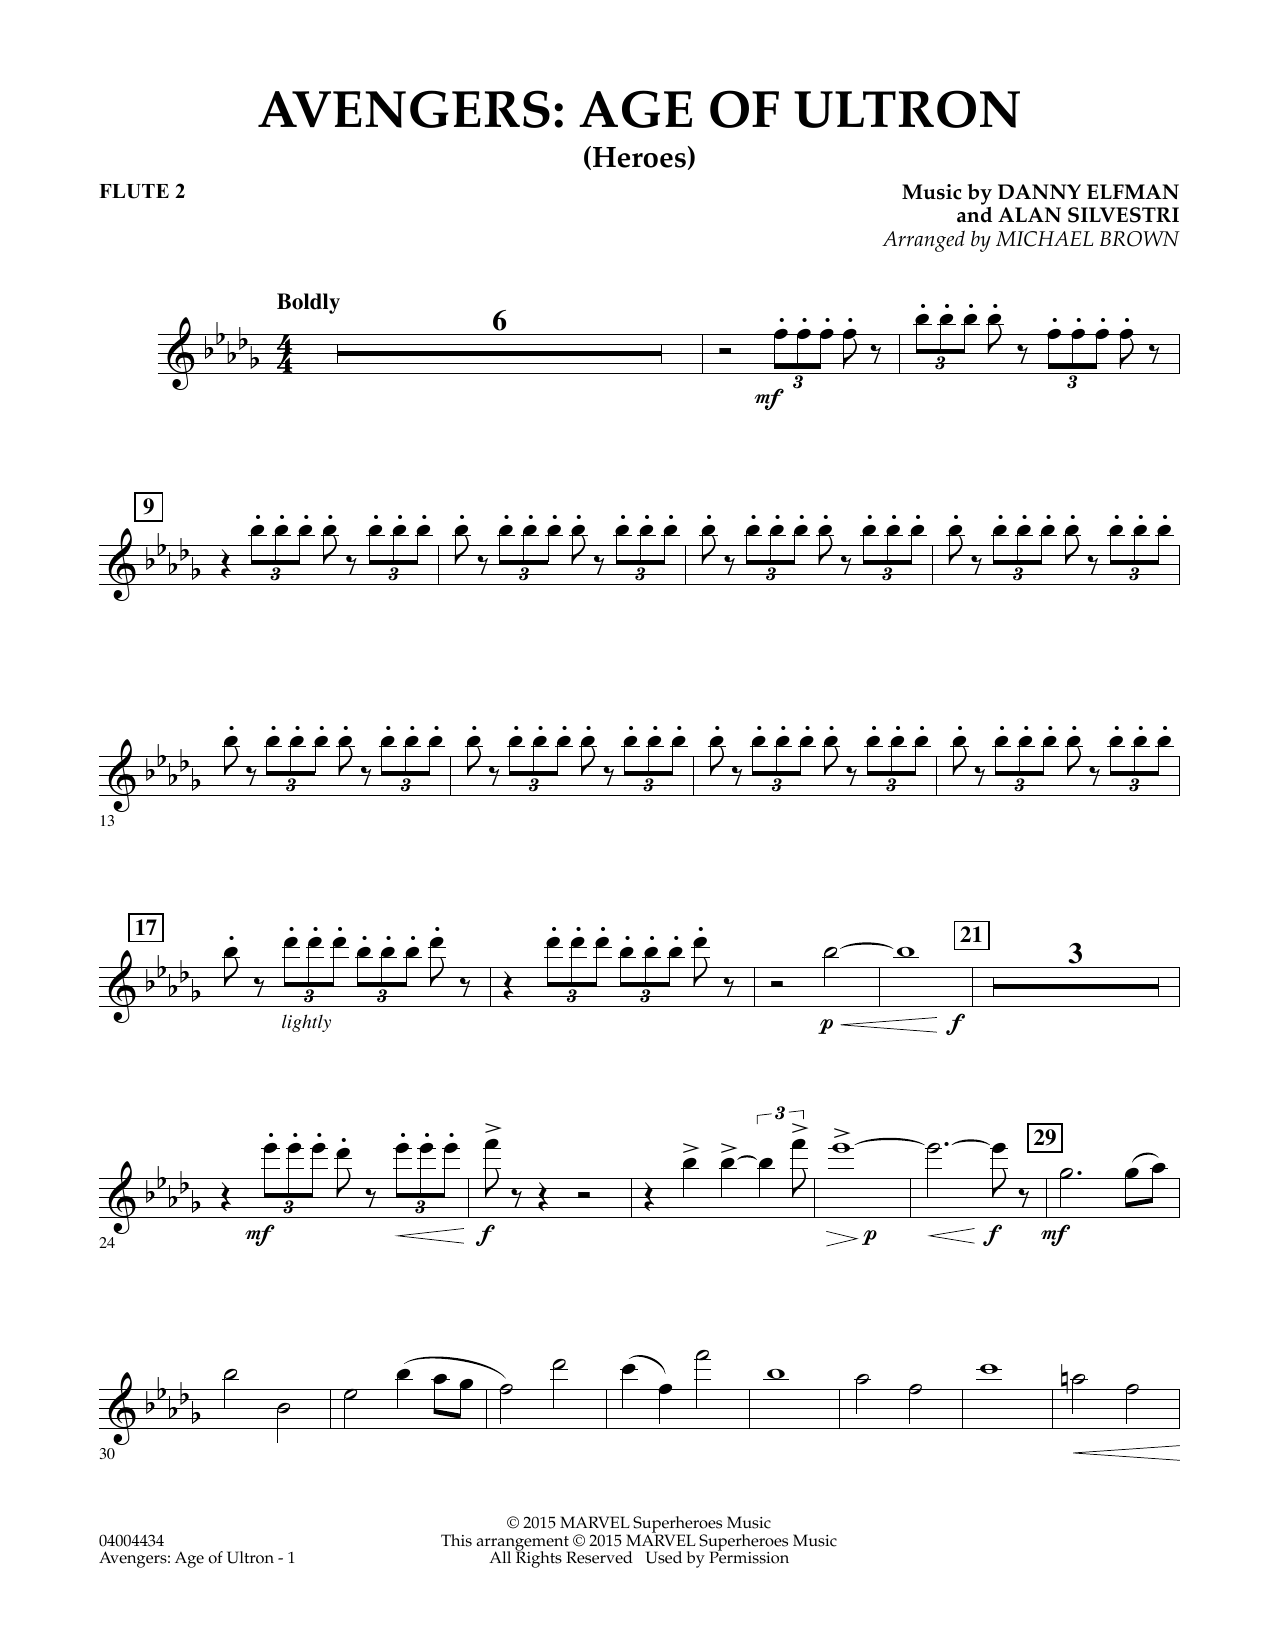 Michael Brown Avengers: The Age of Ultron (Main Theme) - Flute 2 sheet music notes and chords. Download Printable PDF.